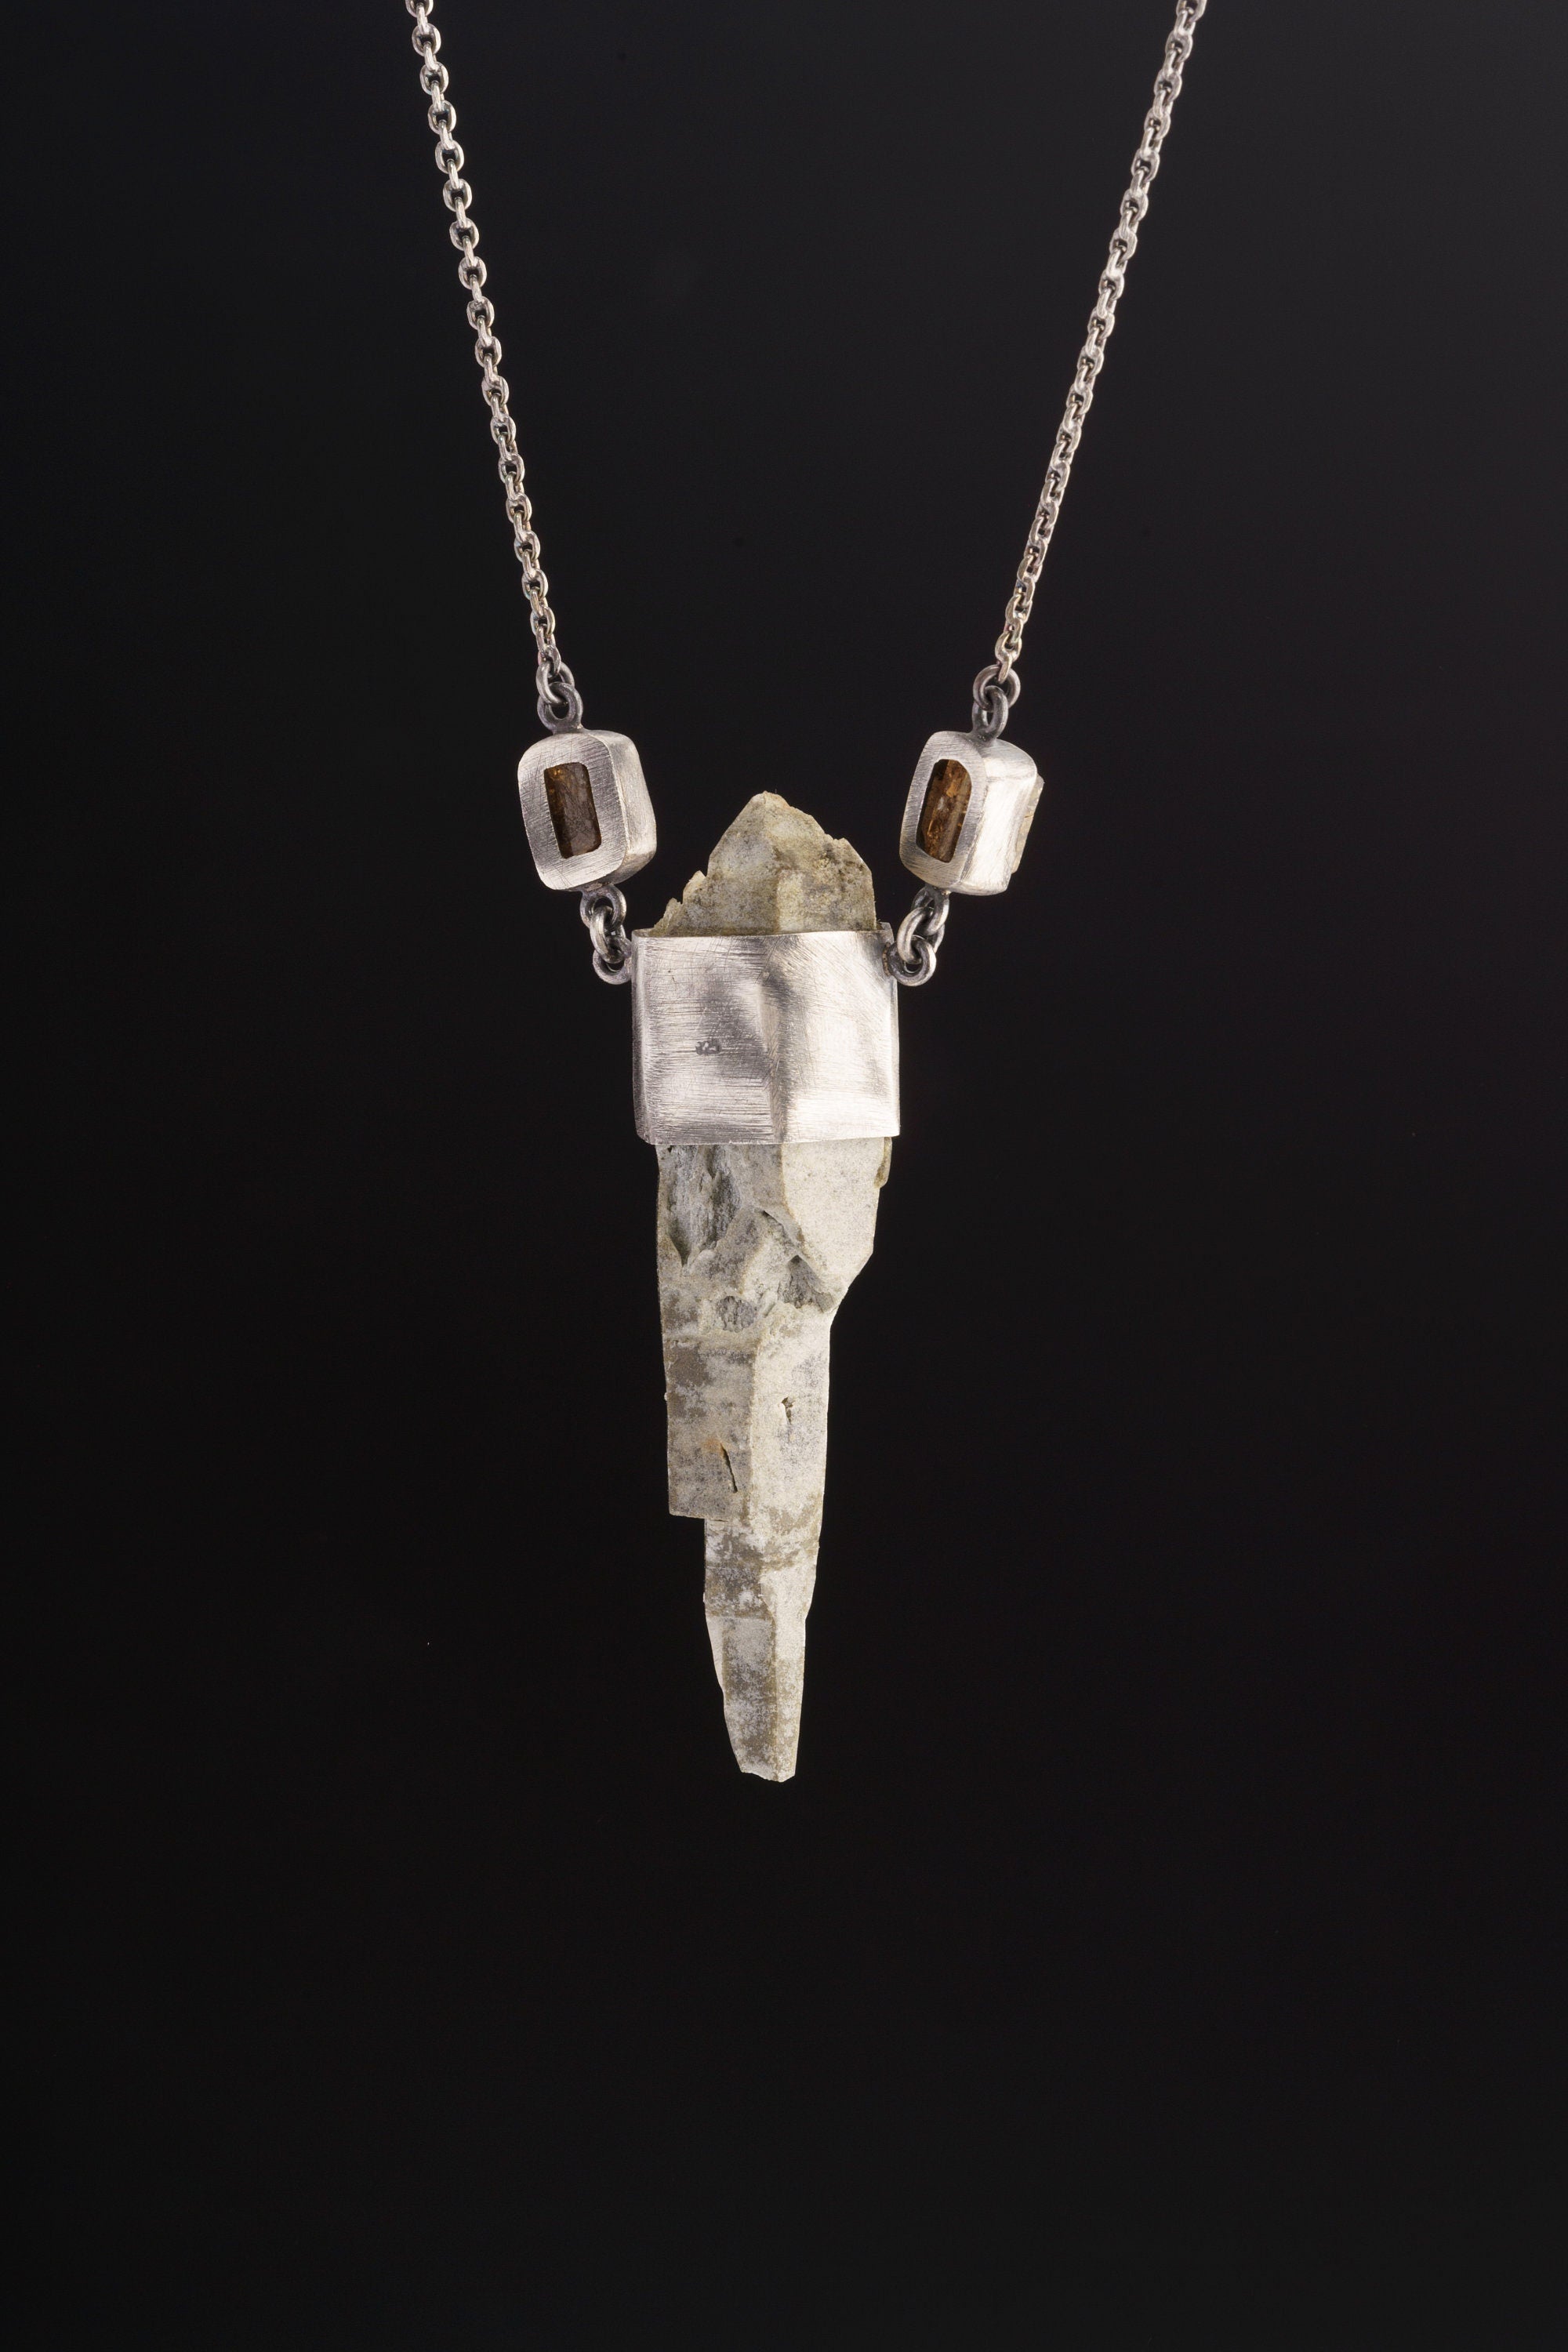 Himalayan Harmony Faceted Emerald, Dravite Tourmaline & Skeletal DT Chloride Quartz Pendant in Oxidized Sterling Silver